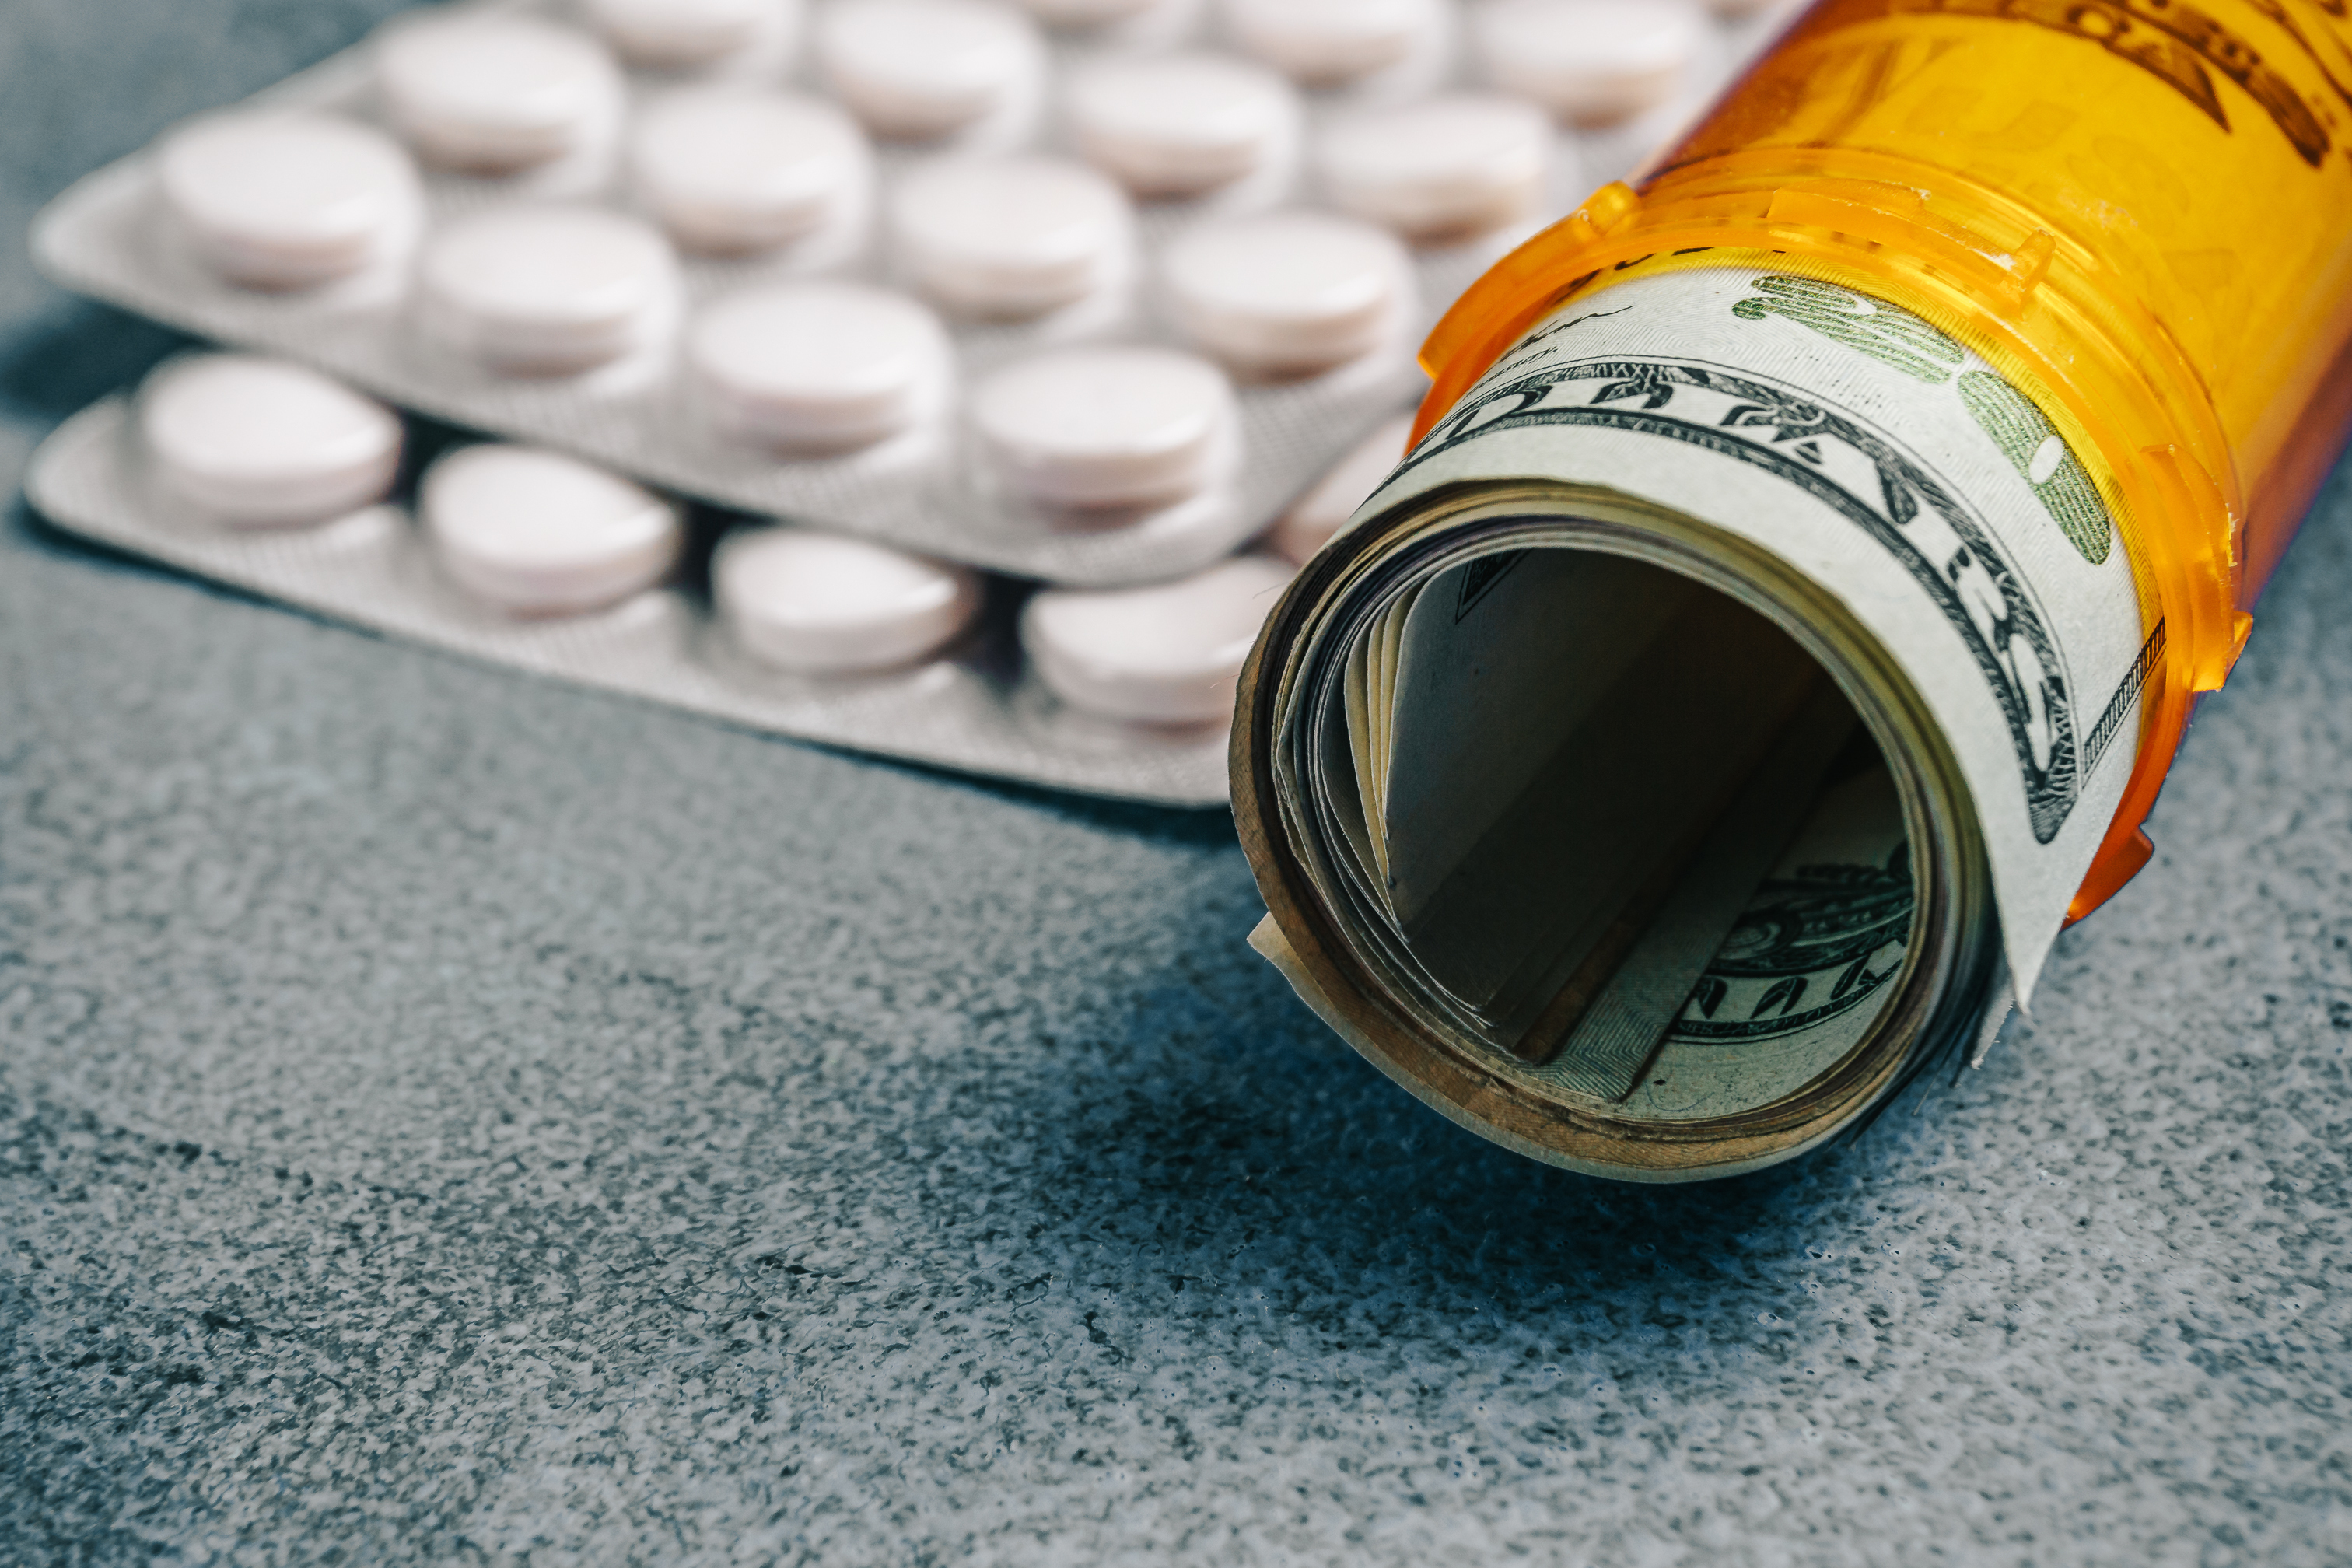 Drug Industry CEOs Are Profiting off Our Opioid Epidemic